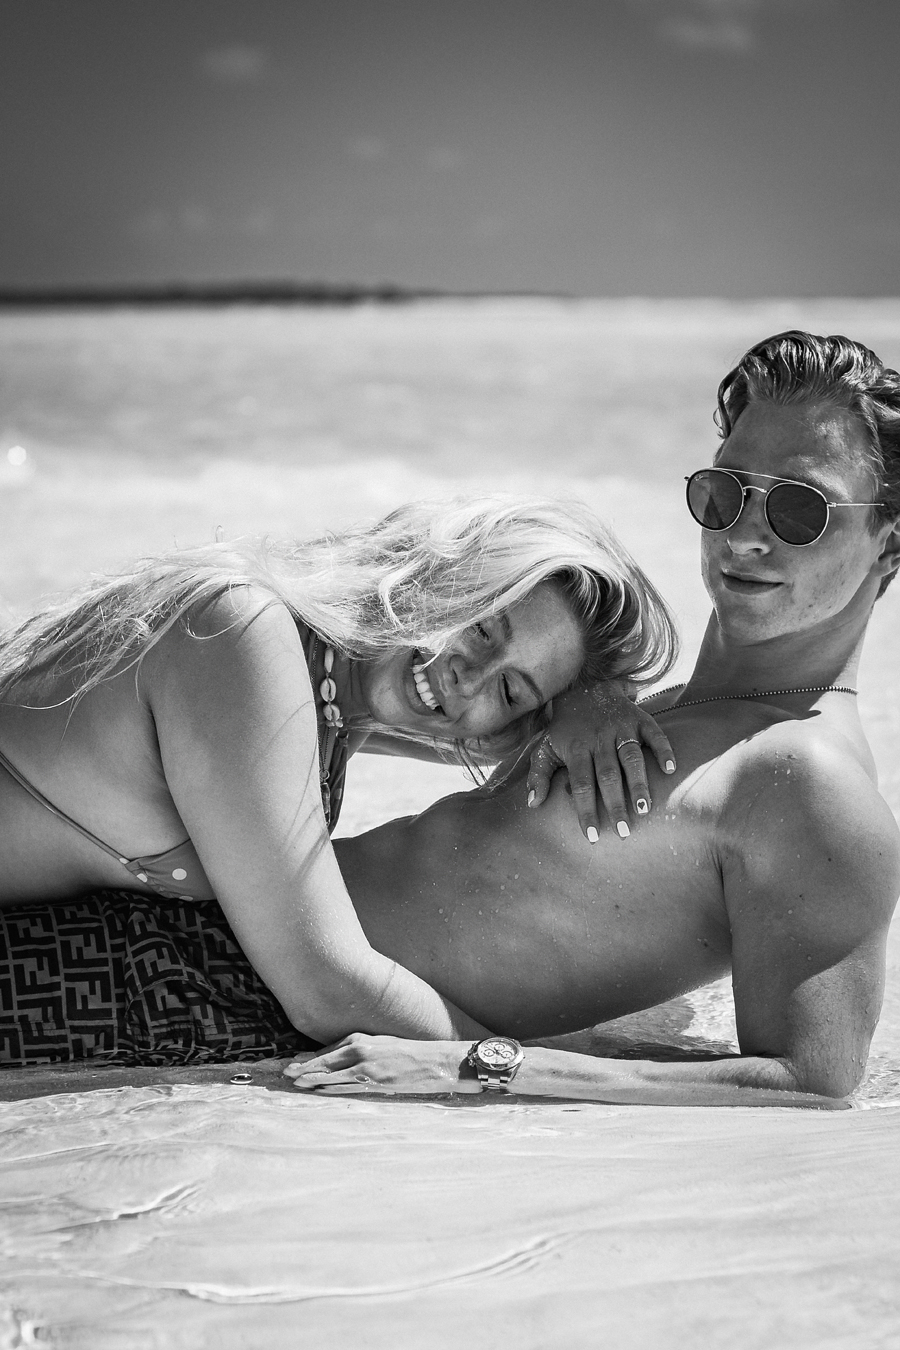 Beach Engagement Photoshoot Poses & Ideas (100s Of Cute Couple Pictures)